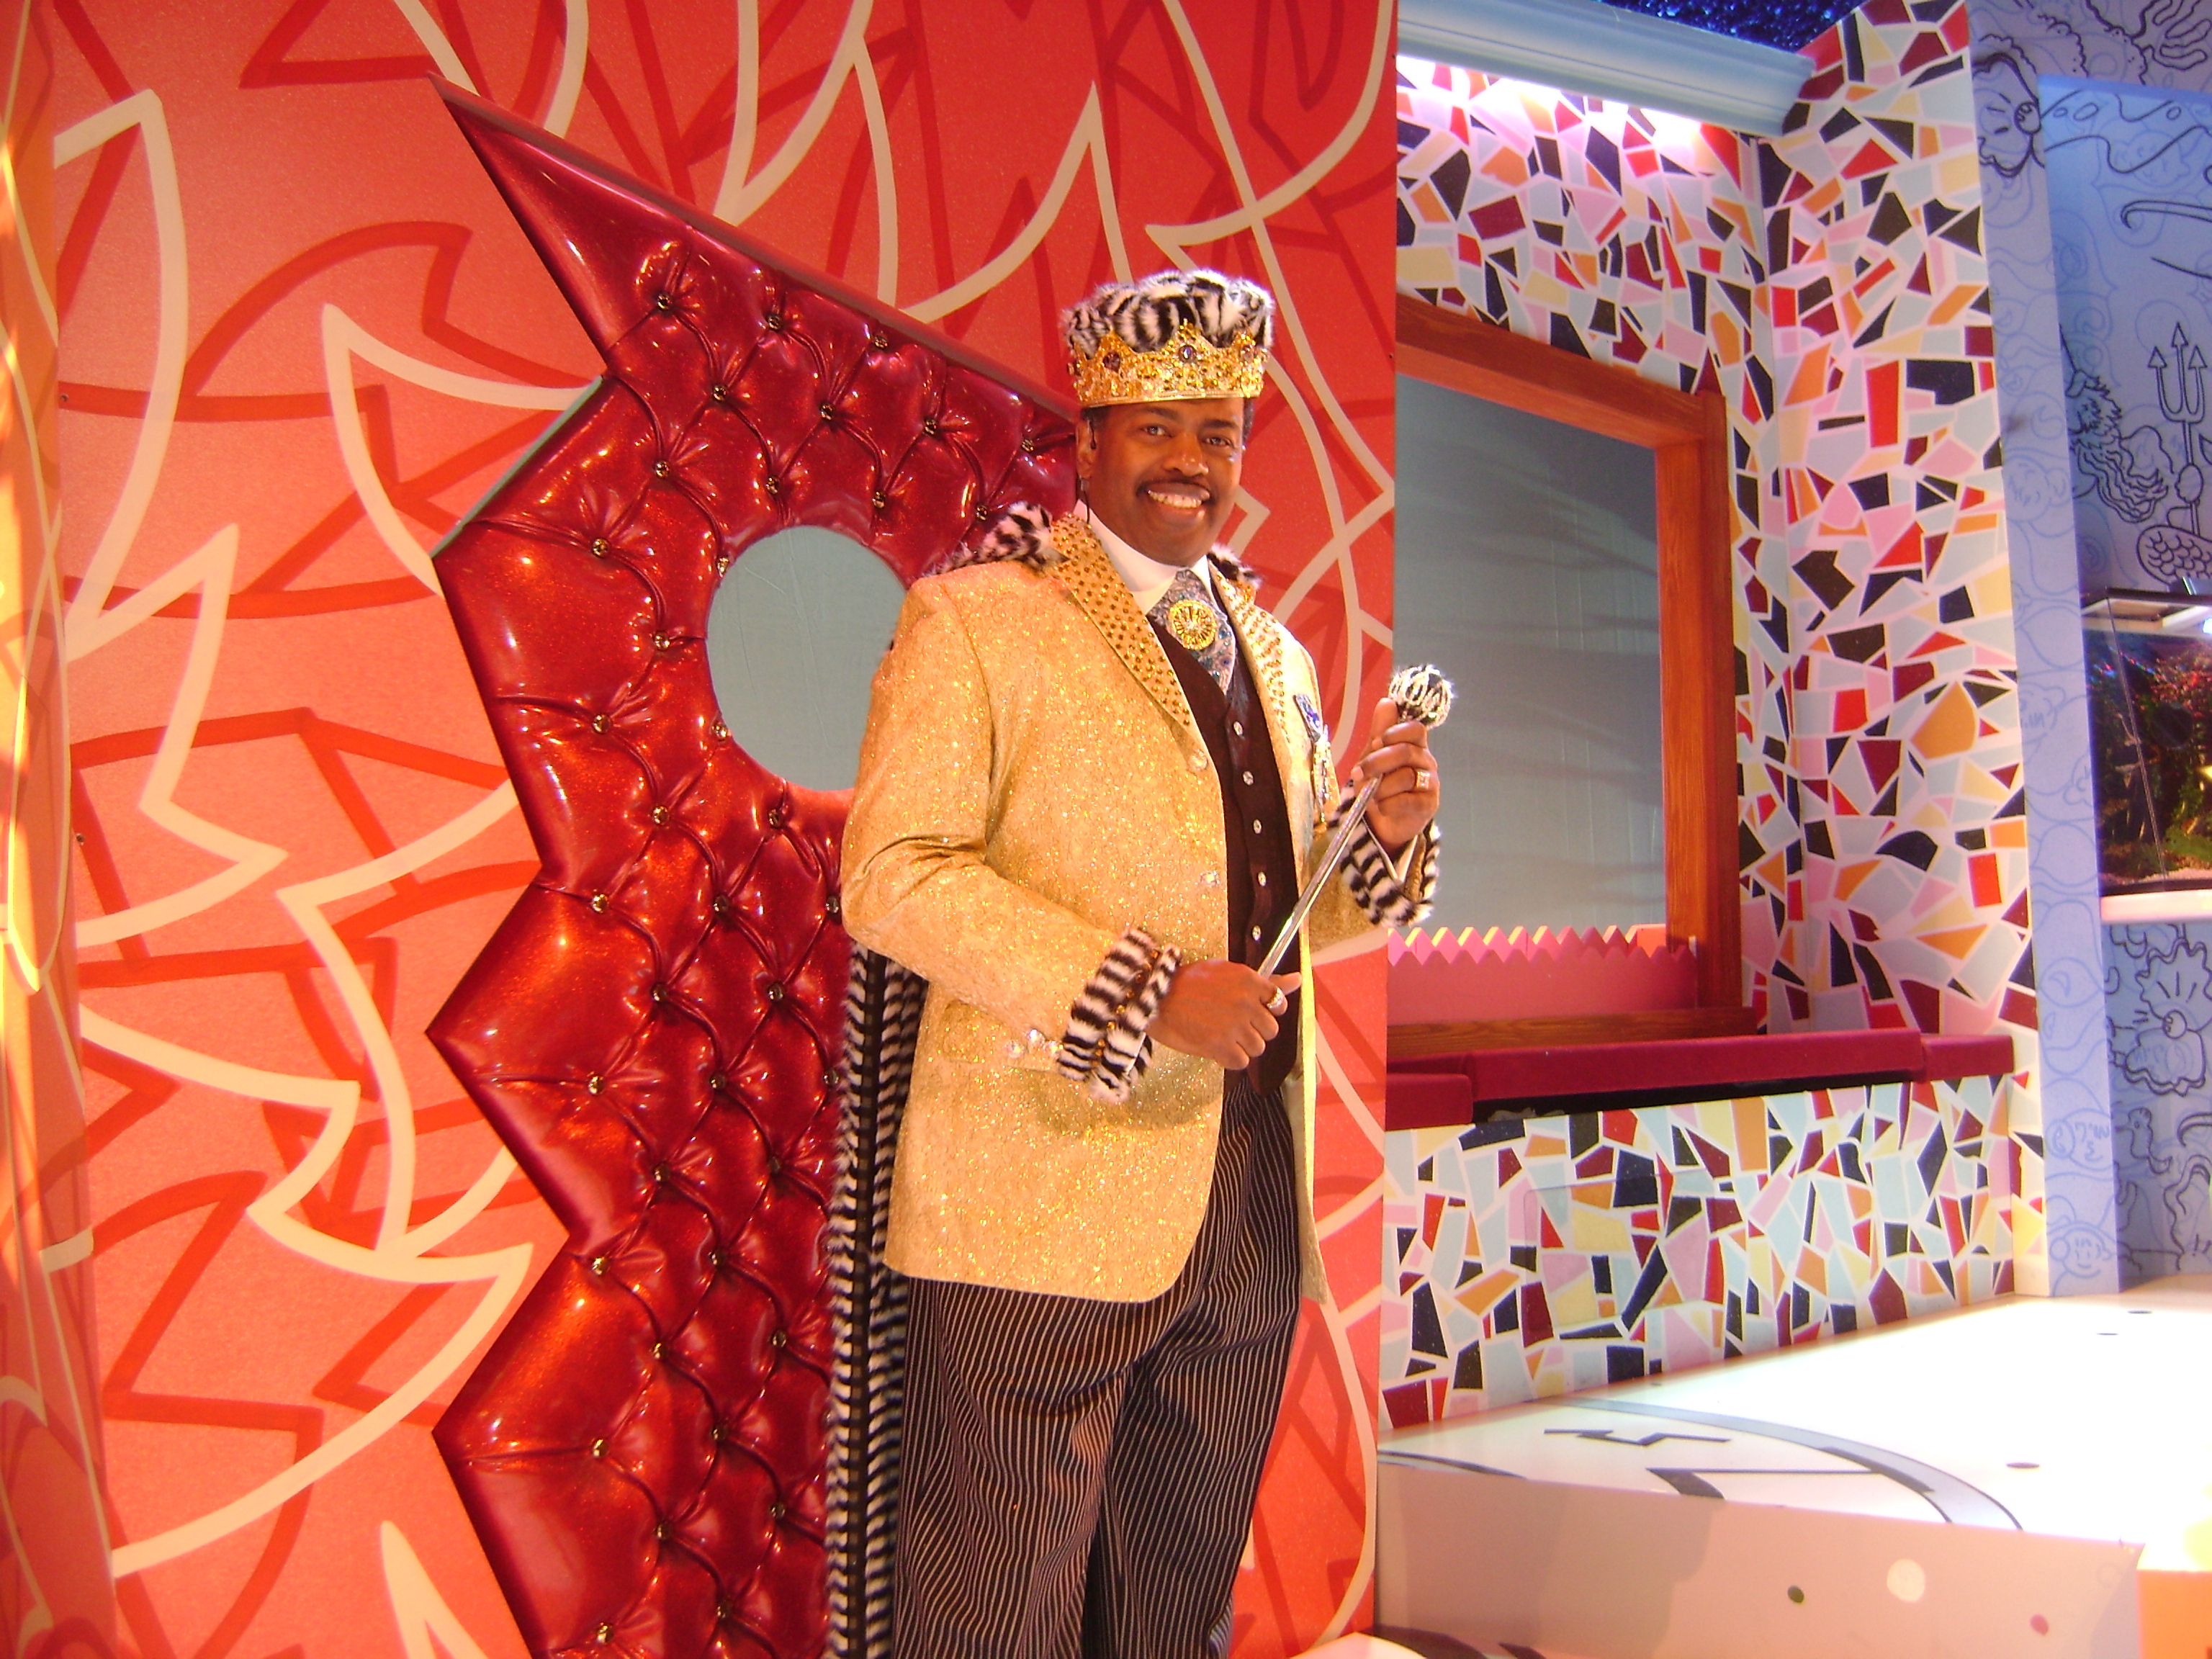 Lance Roberts as The King of Cartoons on the set of Peewee Herman Live in LA